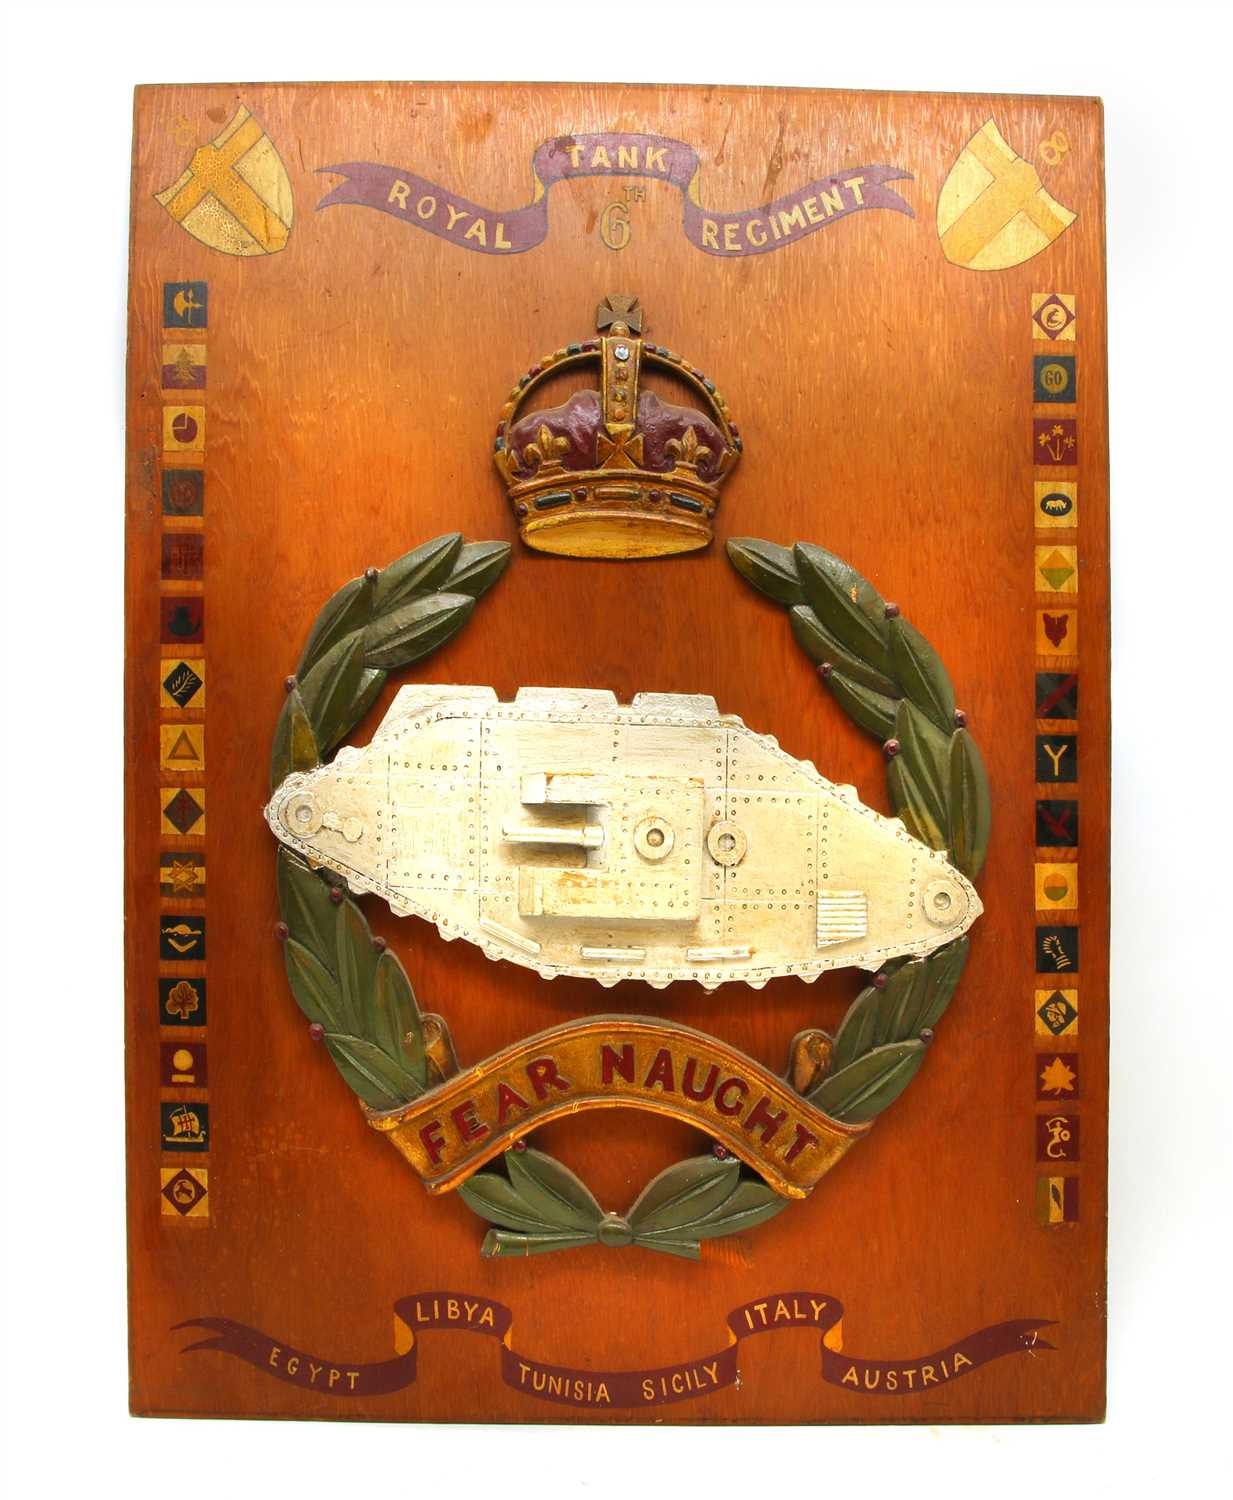 Lot 185 - A WWII 6th Royal Tank Regiment barracks wooden embroidered ‘fear naught’ plaque